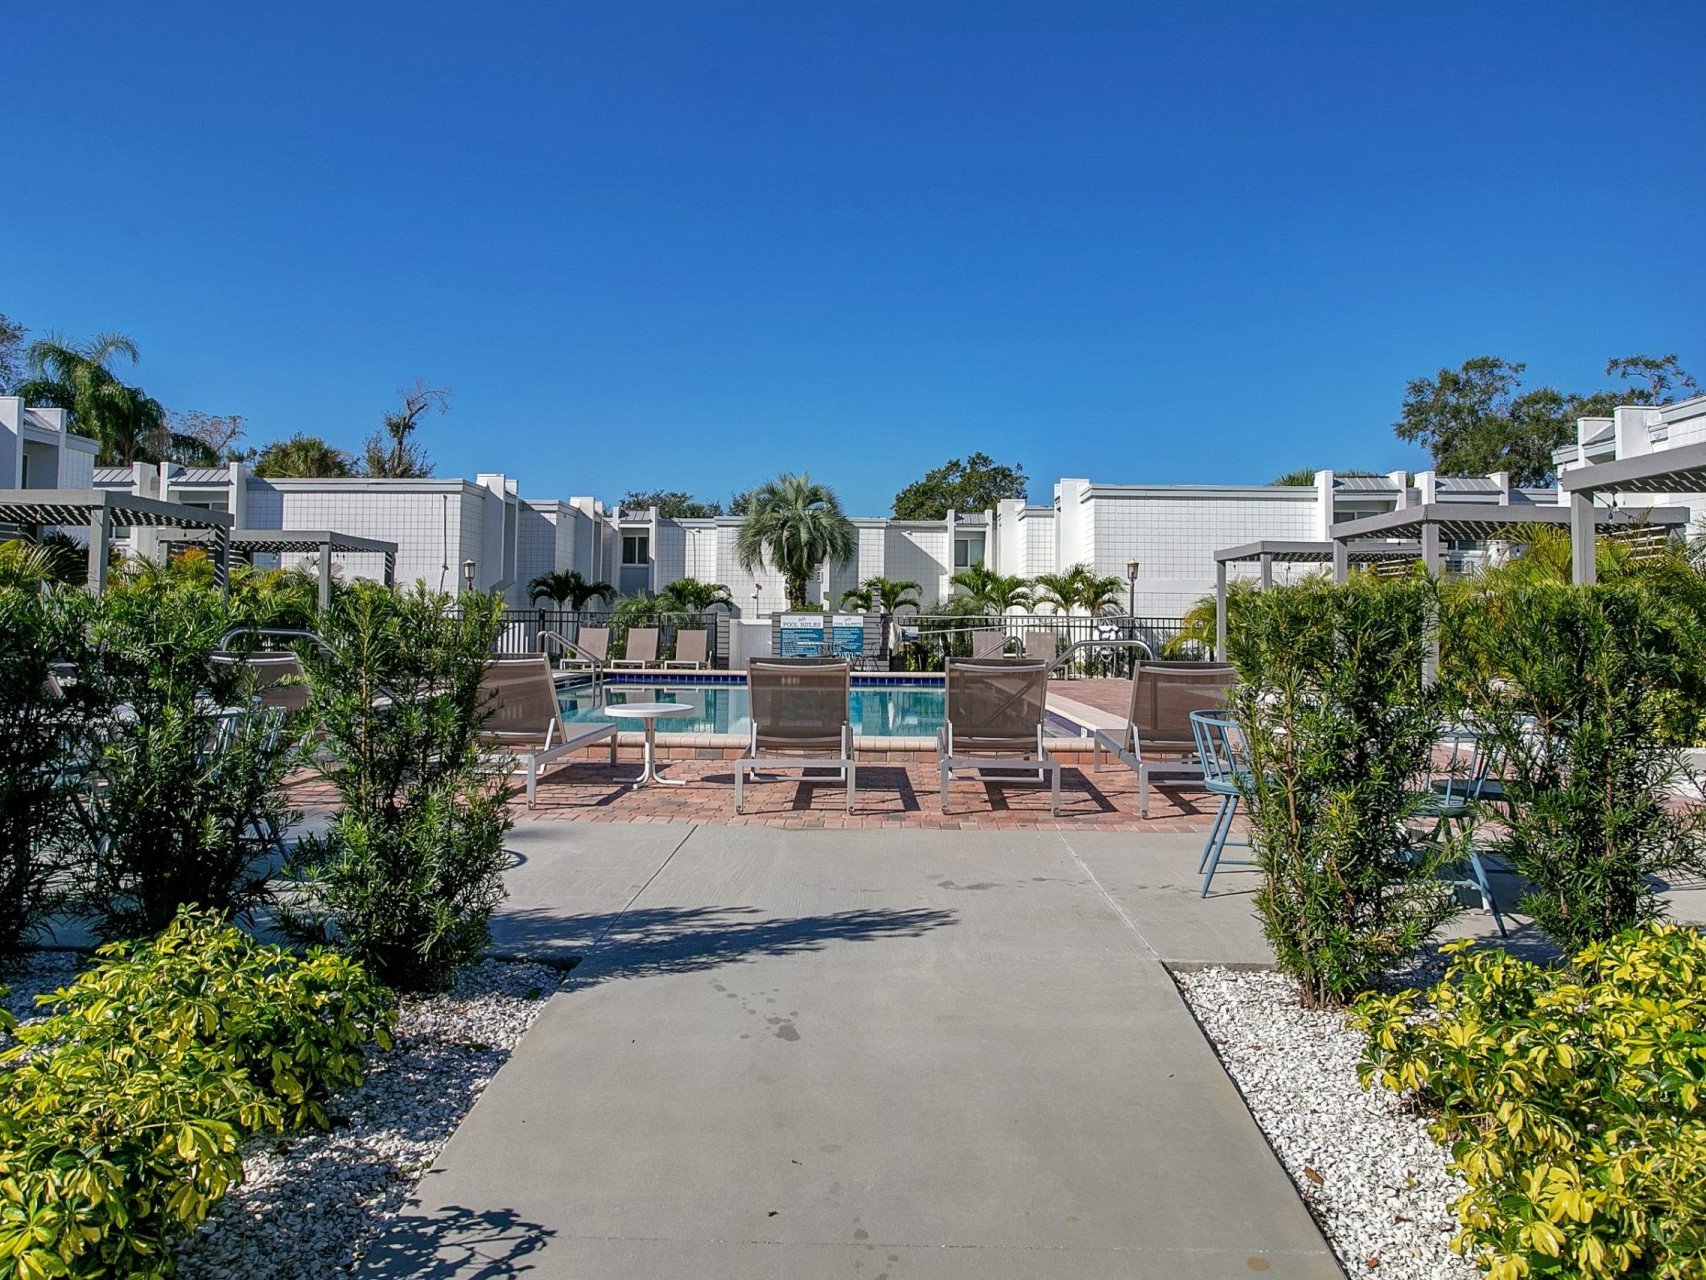 Community pool with lounge chairs, covered pergola seating areas, and palm trees at SoDo Flats.